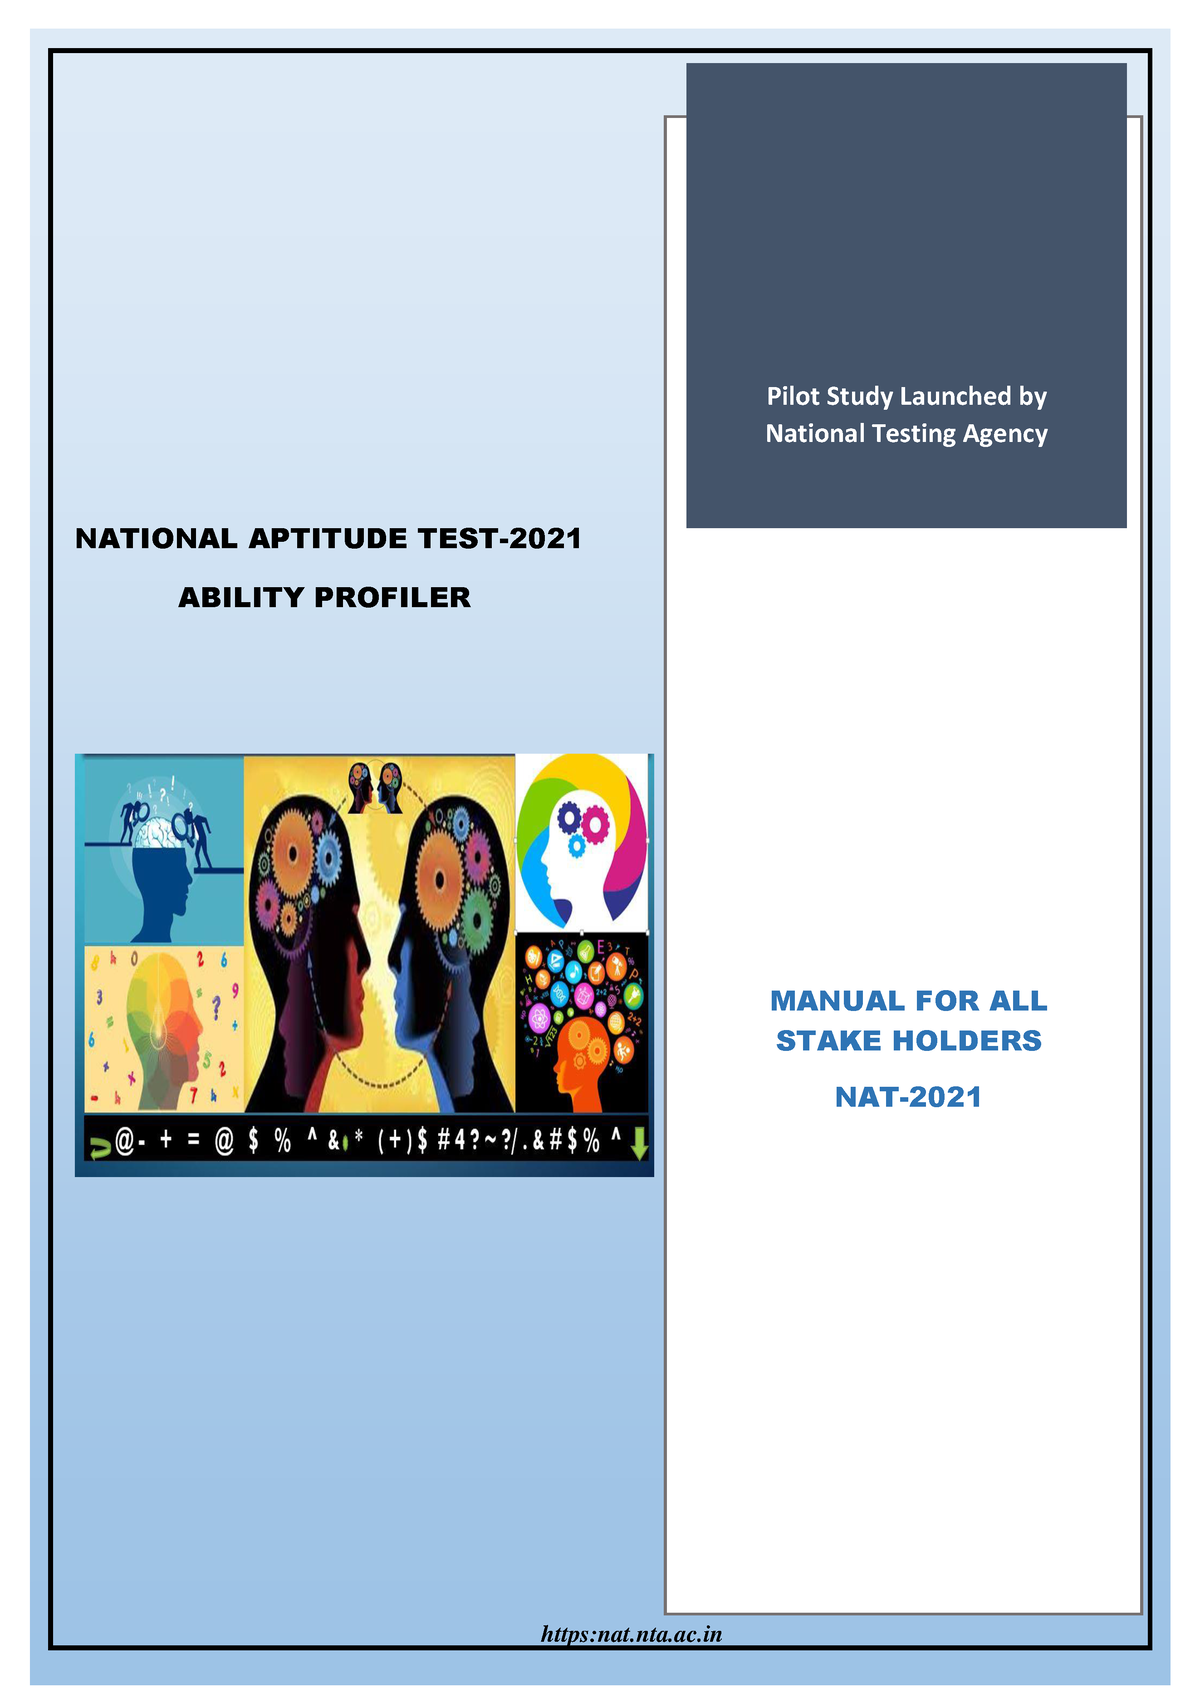 manual-for-all-stakeholders-nat-2021-national-aptitude-test-2021-ability-profiler-pilot-study